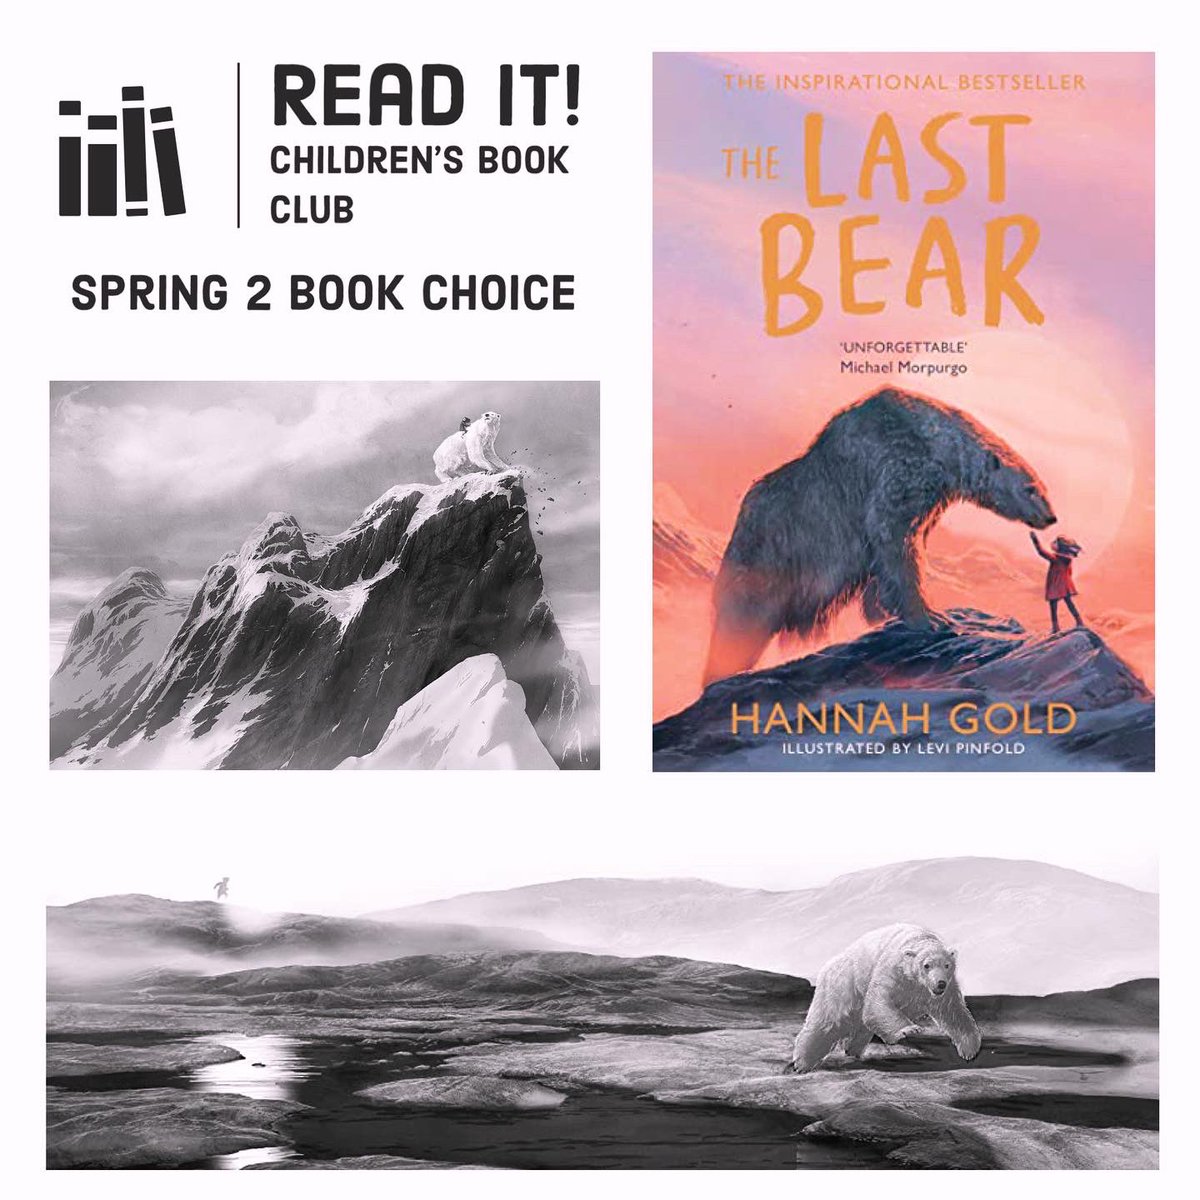 The Last Bear by Hannah Gold will be the Spring 2 book choice for Read It! Children’s Book Club. I cannot wait to share this beautiful book! Places available to book now…contact mary@read-it-kids.co.uk for more info! @read_it_kids @HGold_author #levipinfold